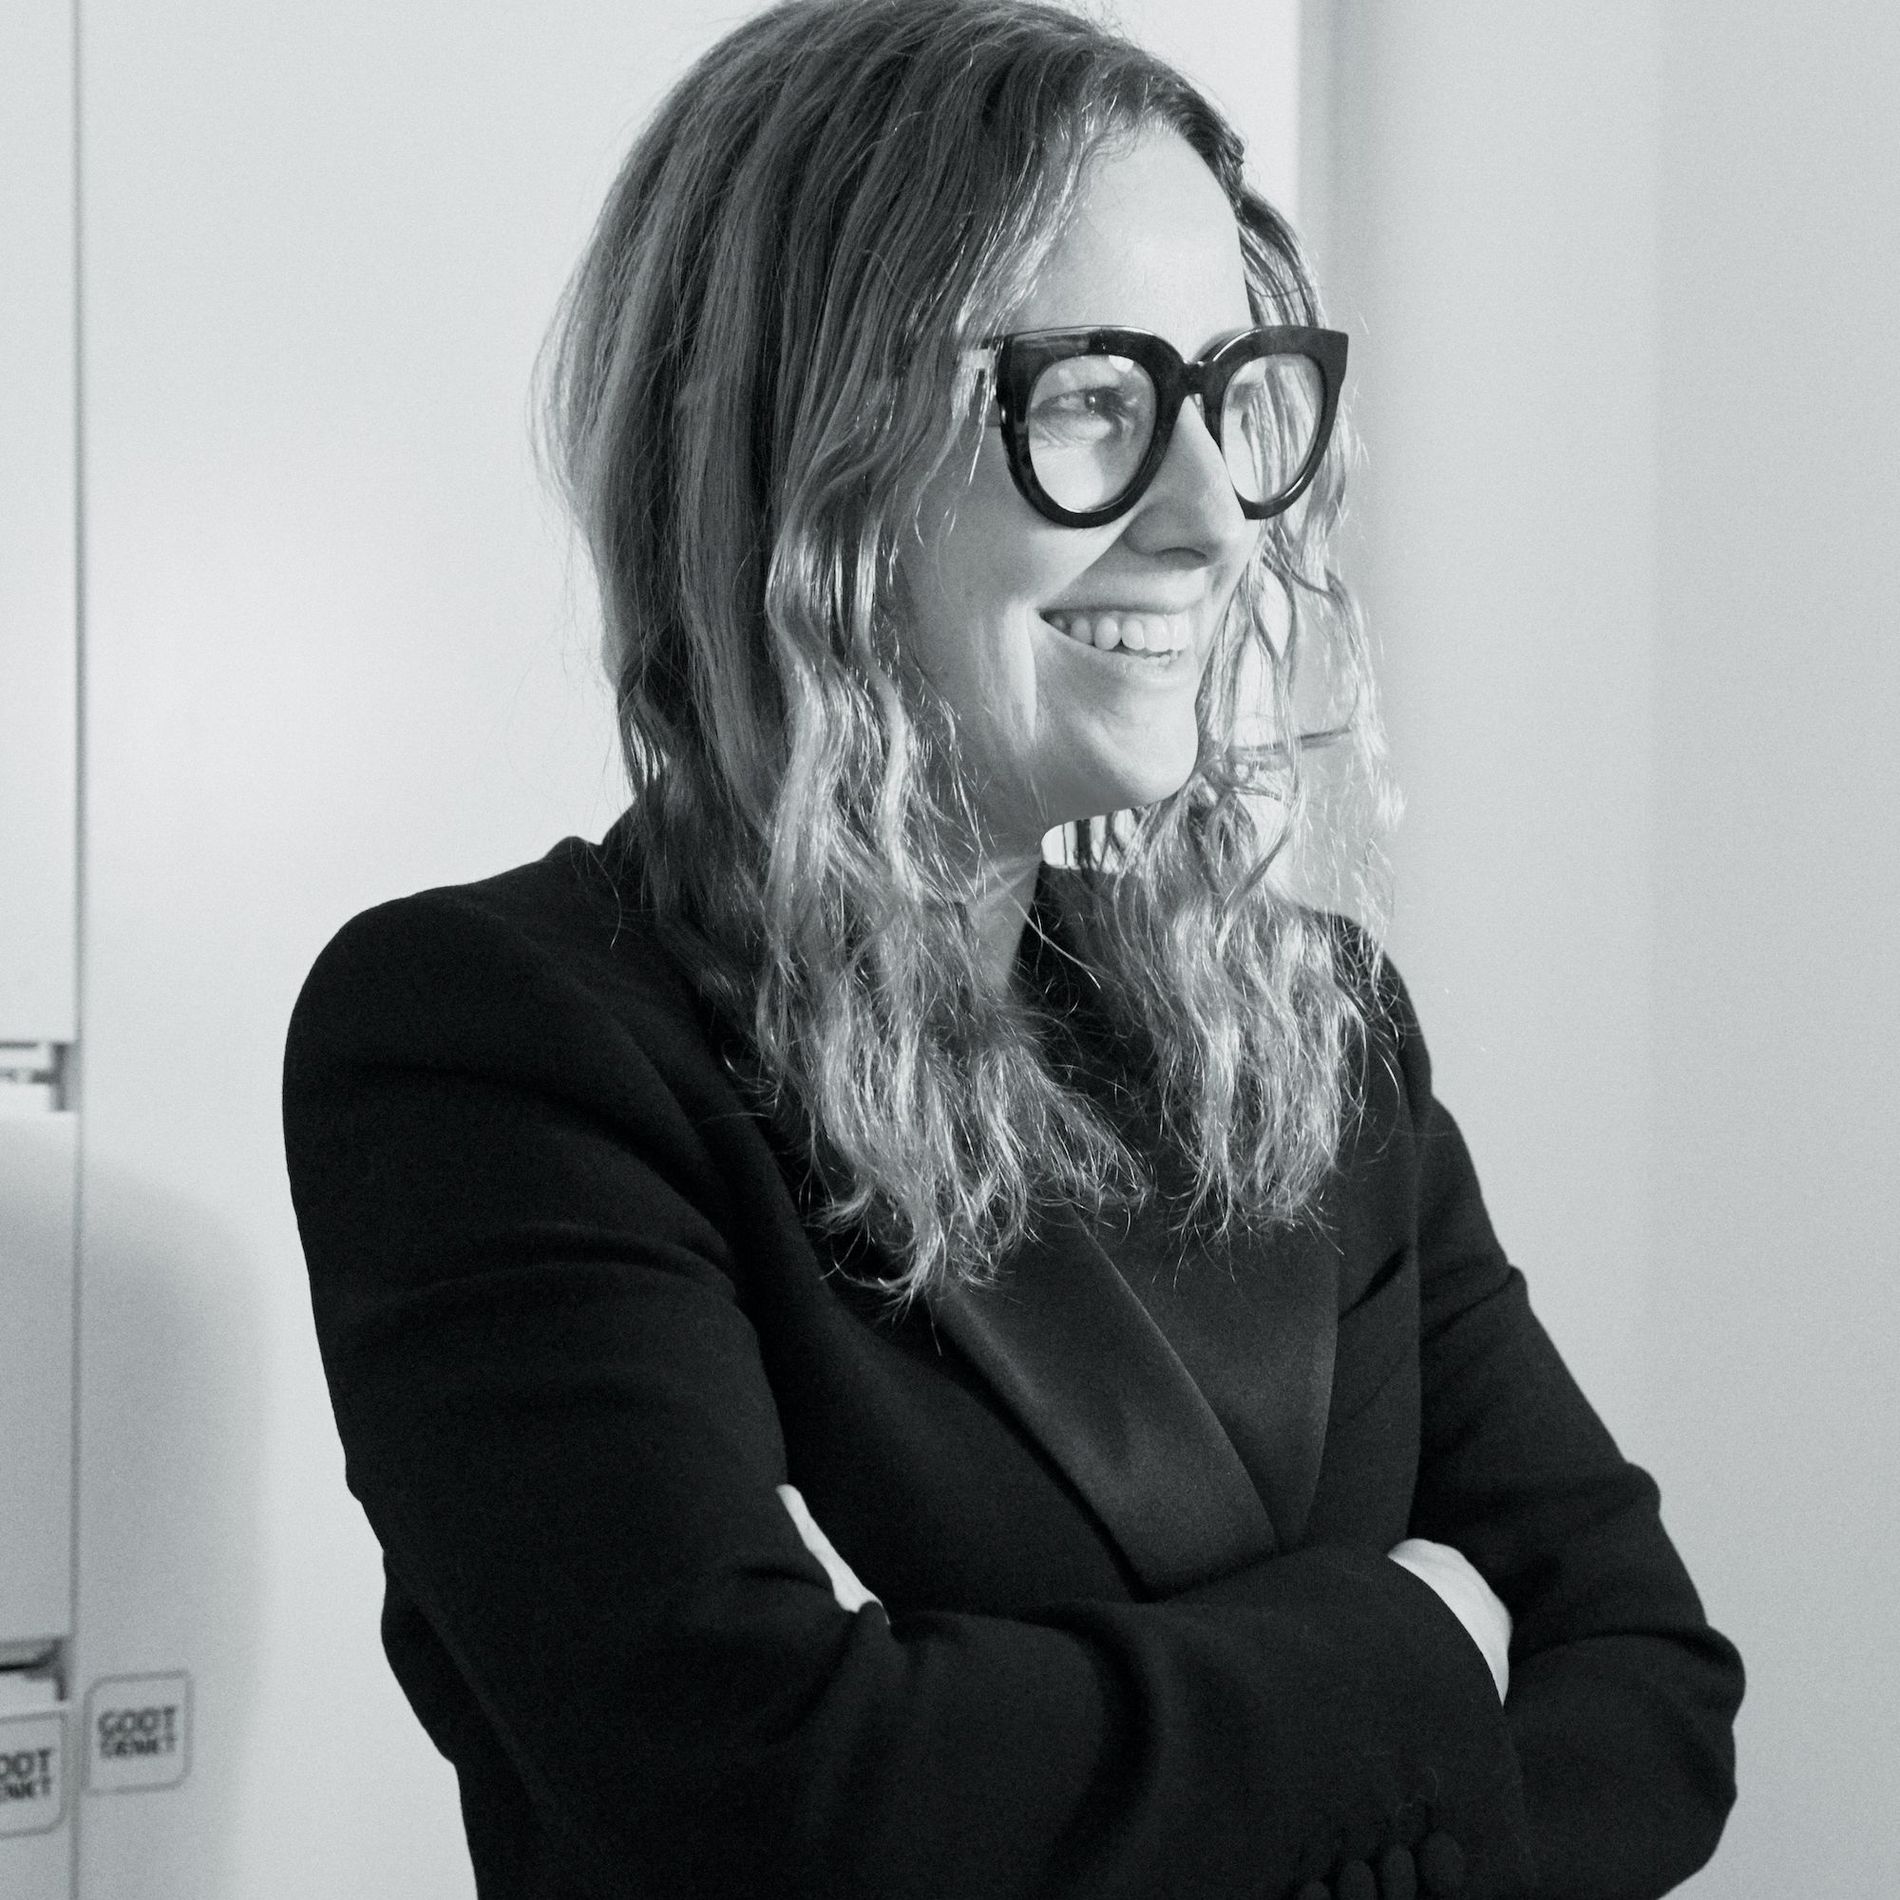 Designer Carin Rodebjer with her arms folded in a black and white portrait